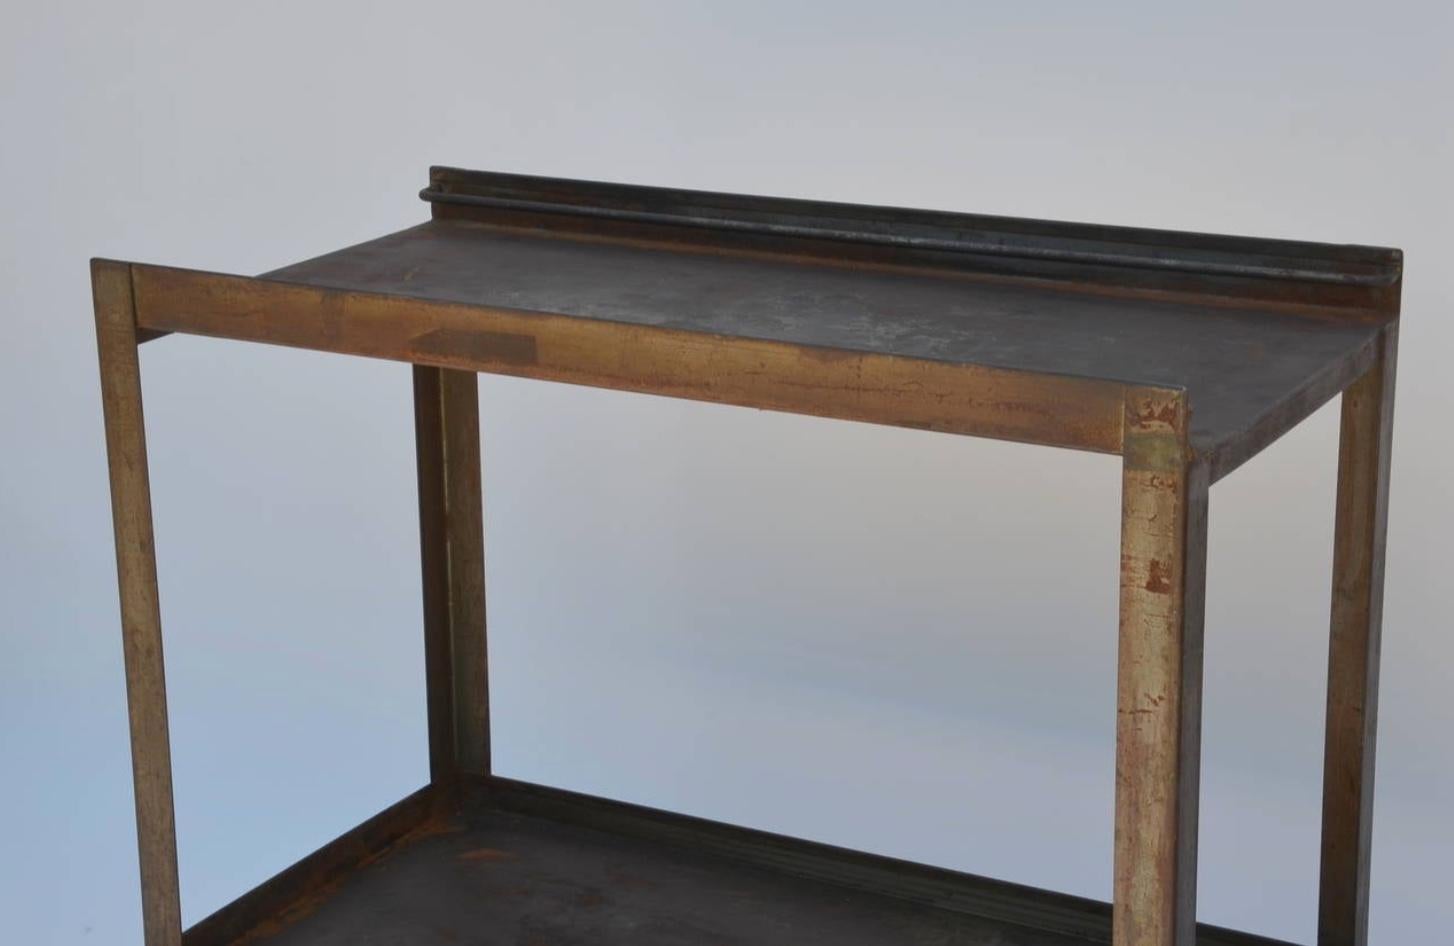 Patinated Sturdy Industrial Bar Cart on Wheels For Sale